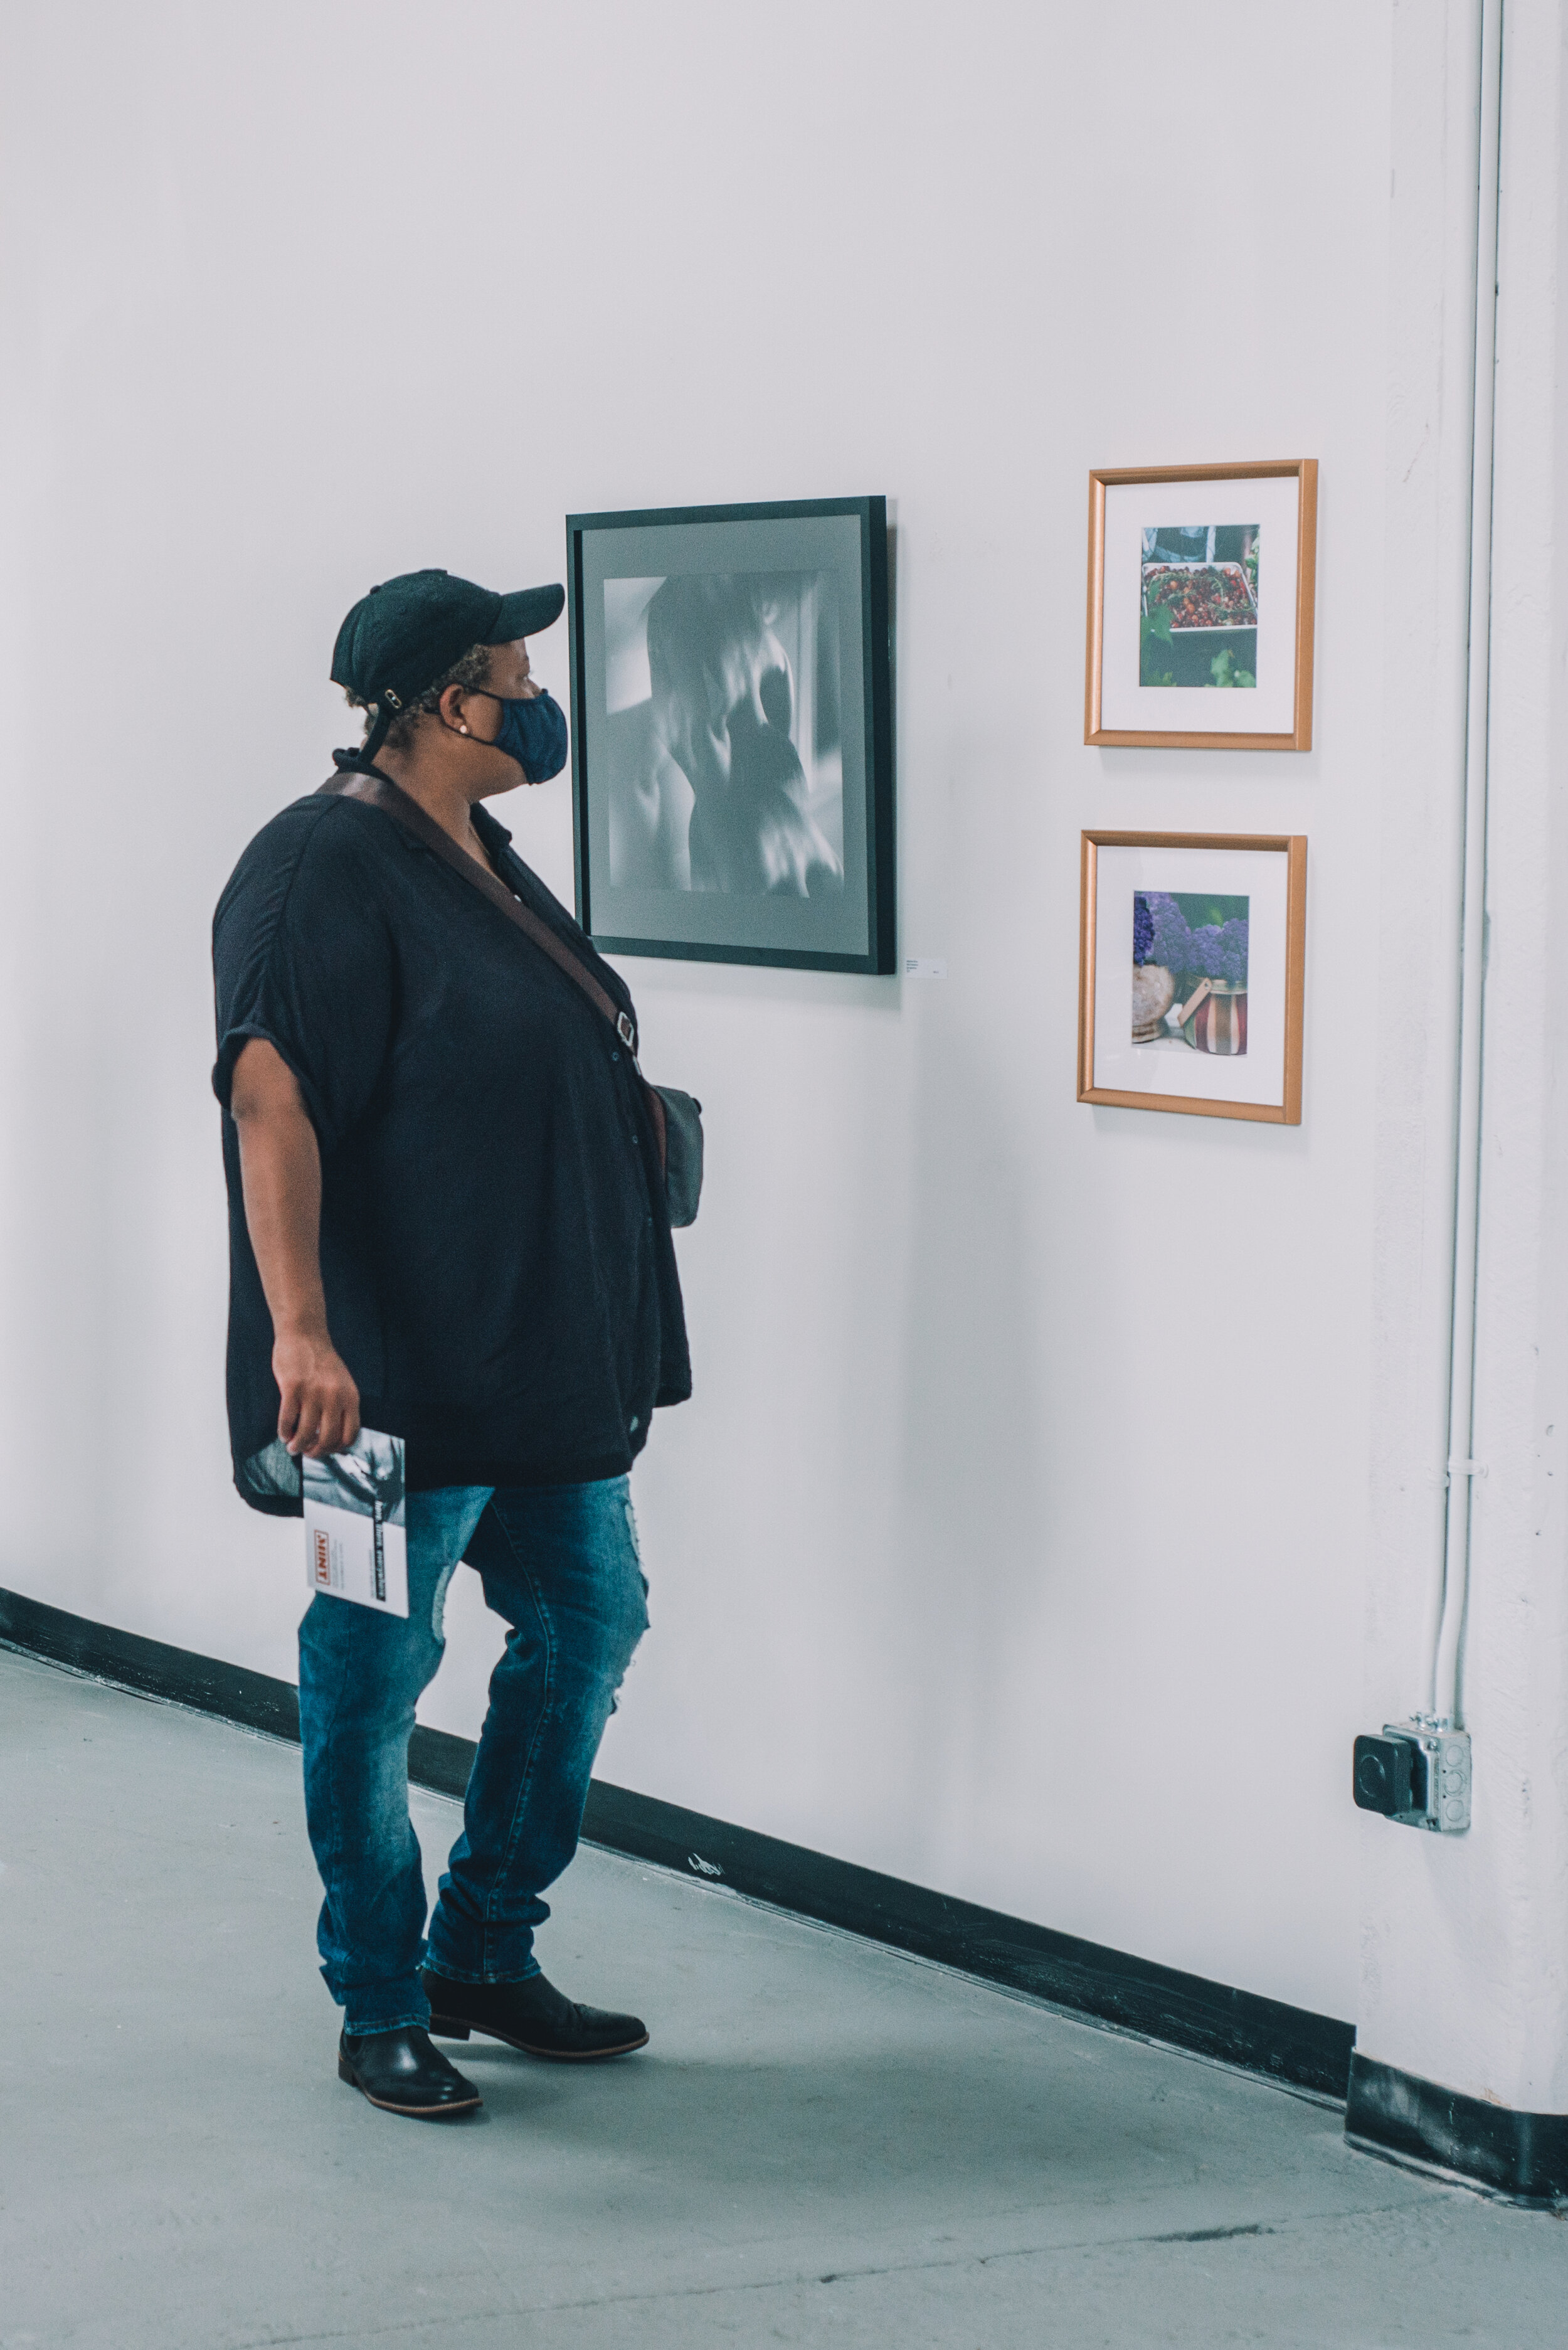   Exhibition:  here.there.everywhere  Curator:  Sierra King Location: Mint Gallery at the MET Atlanta, GA  Photo By:  John Stephens (@jas_photo) 